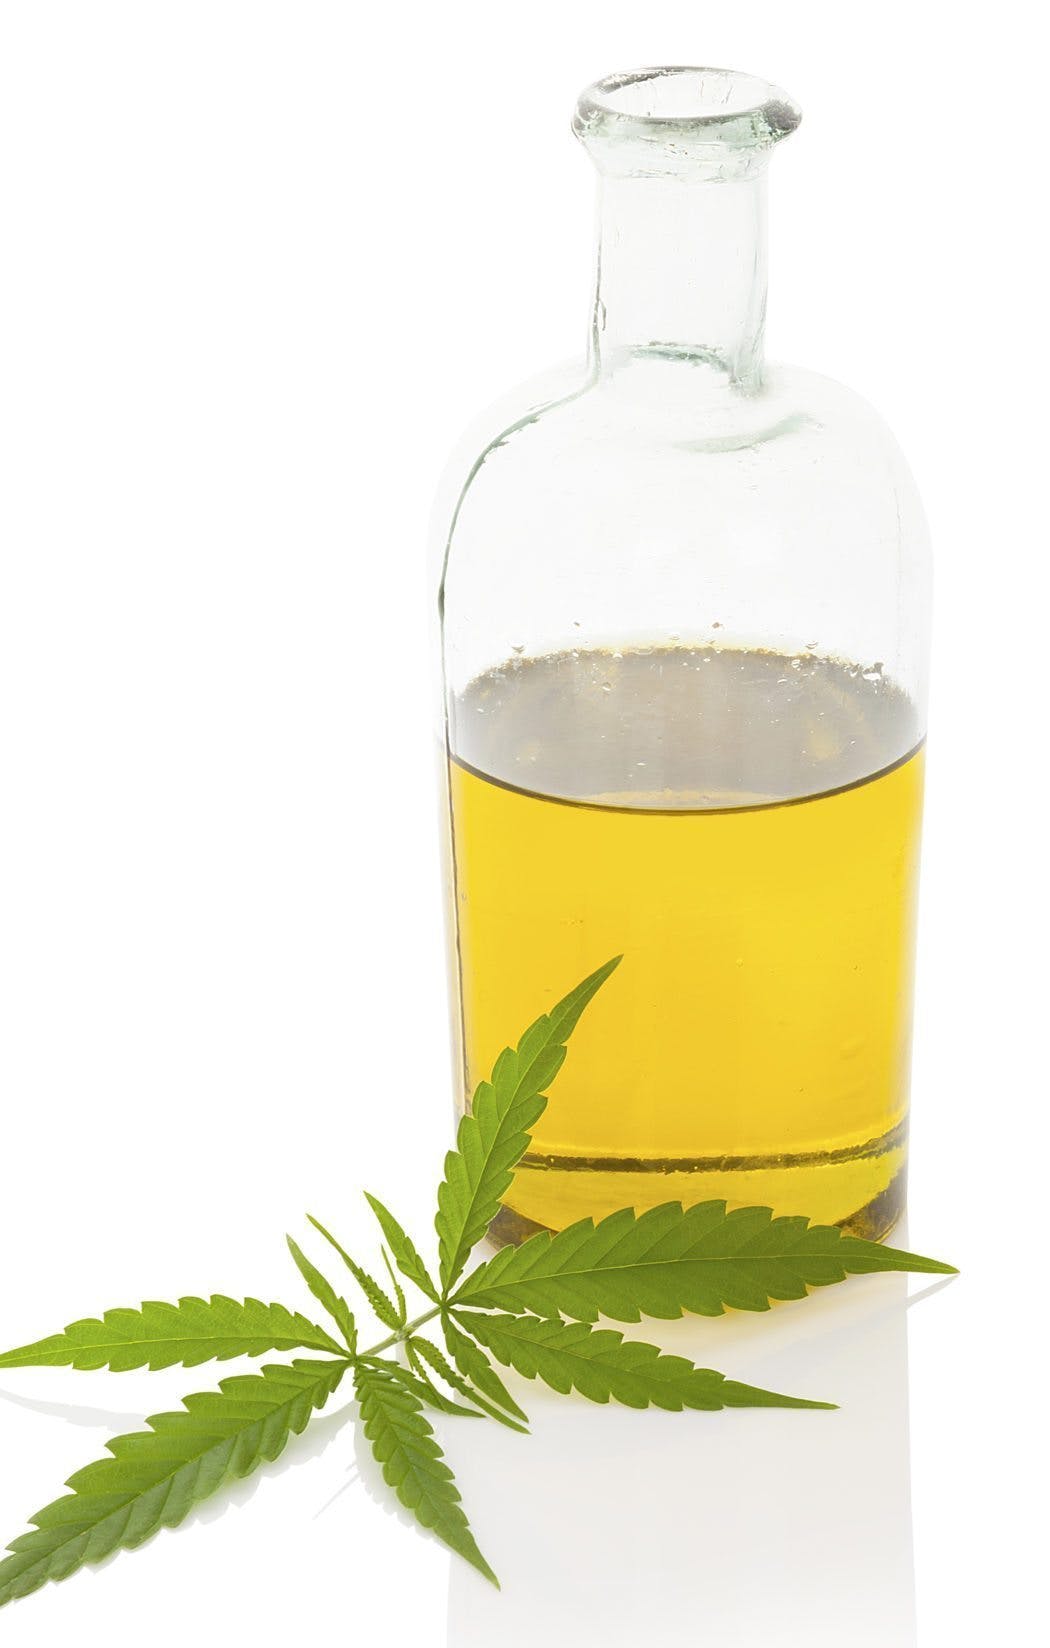 edible-cannabis-cooking-oil-12-cup